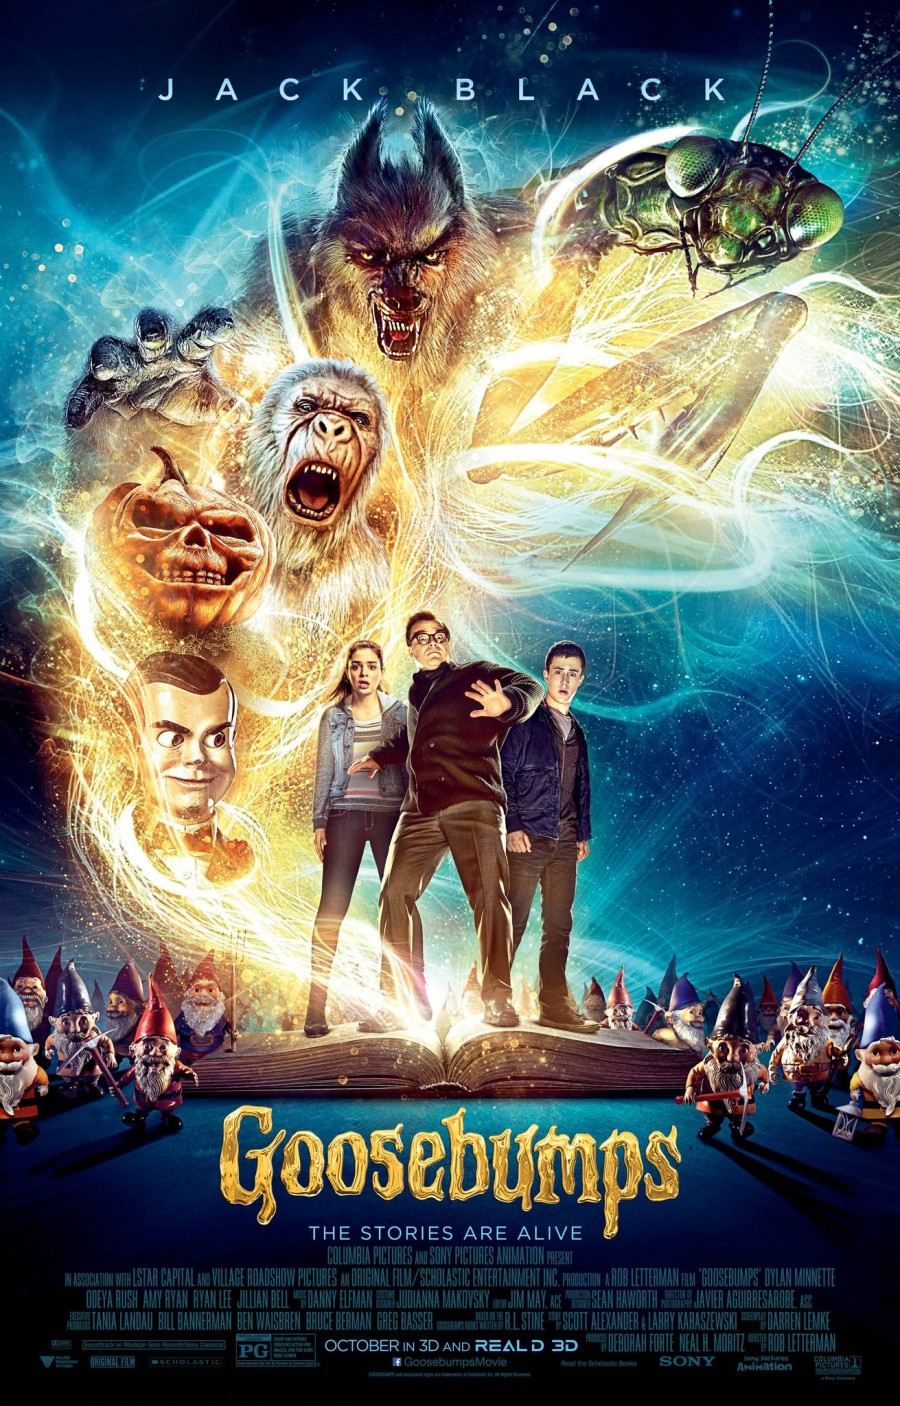 The first GOOSEBUMPS trailer is here. The Stories are Alive